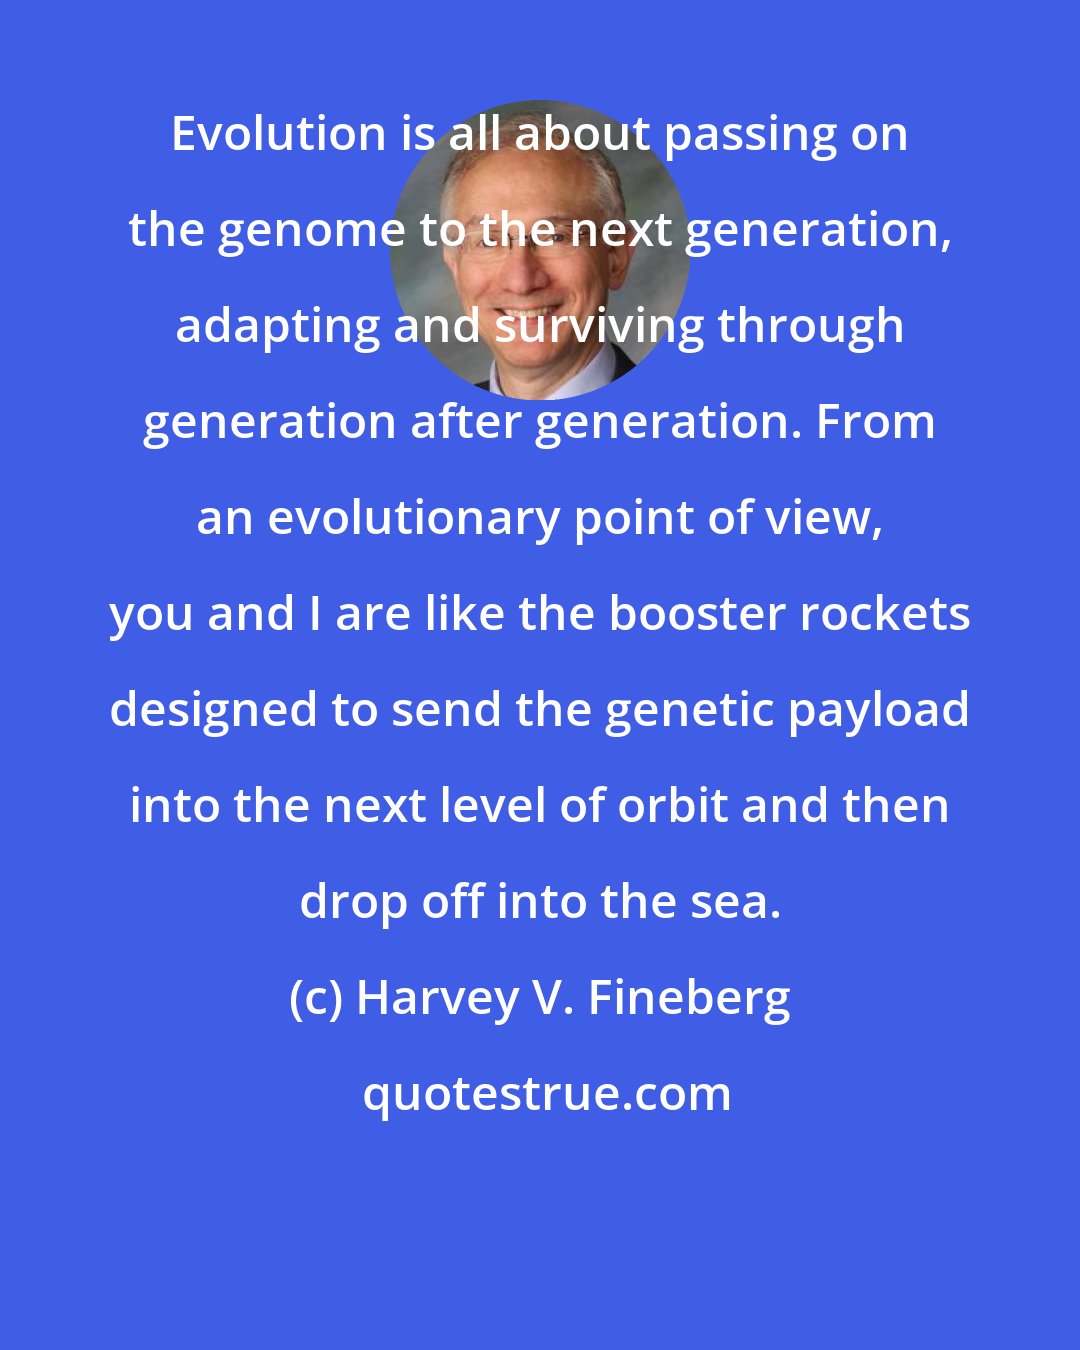 Harvey V. Fineberg: Evolution is all about passing on the genome to the next generation, adapting and surviving through generation after generation. From an evolutionary point of view, you and I are like the booster rockets designed to send the genetic payload into the next level of orbit and then drop off into the sea.